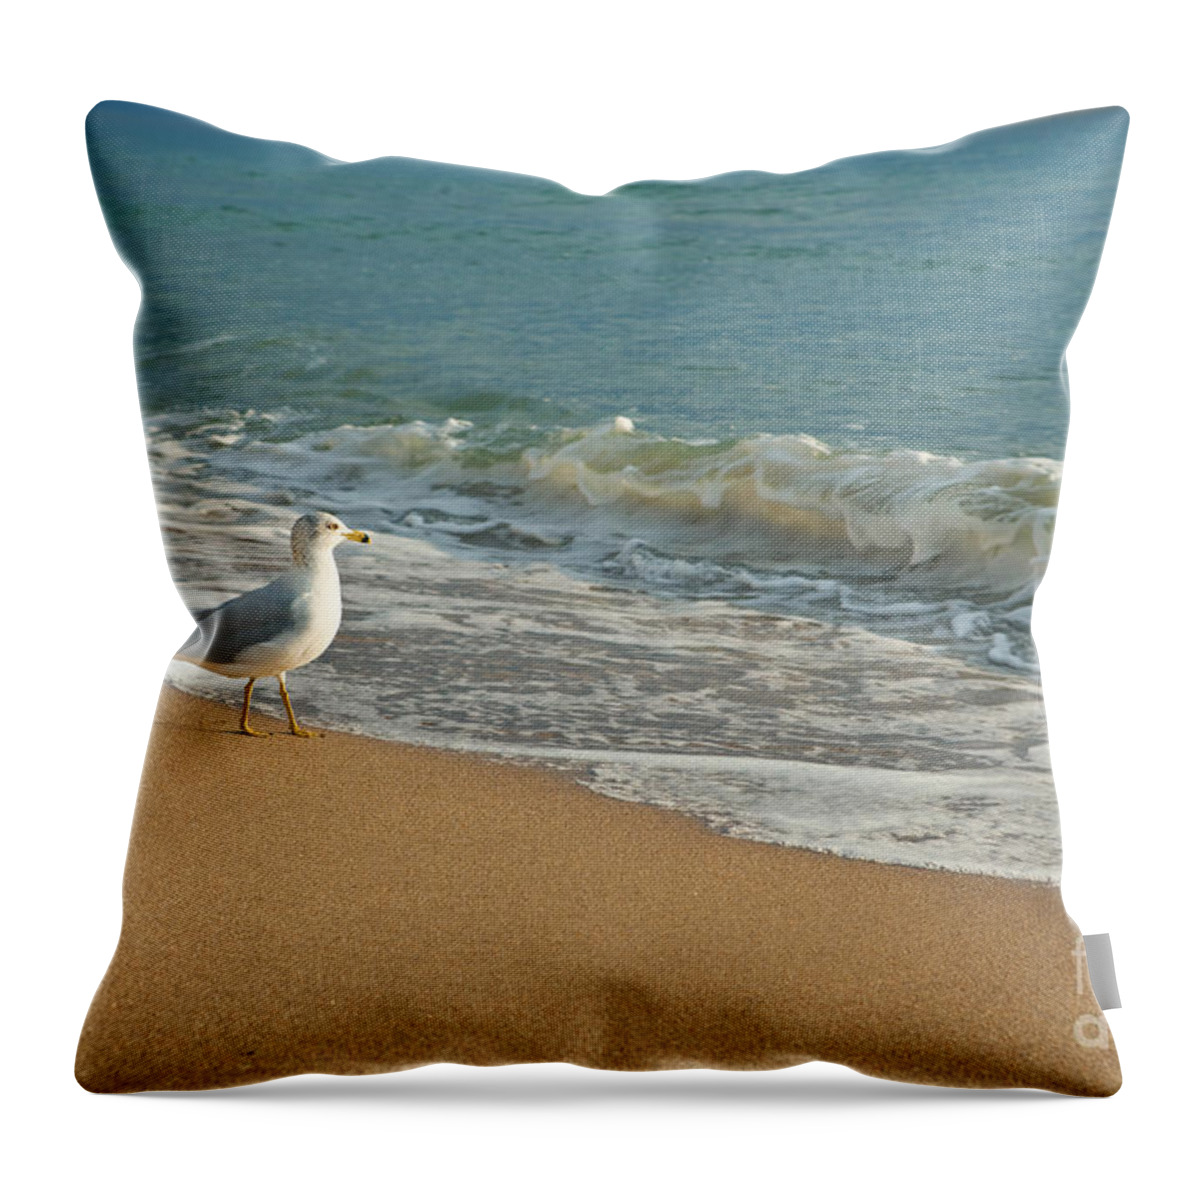 Bird Throw Pillow featuring the photograph Seagull Walking On A Beach by Sharon Dominick